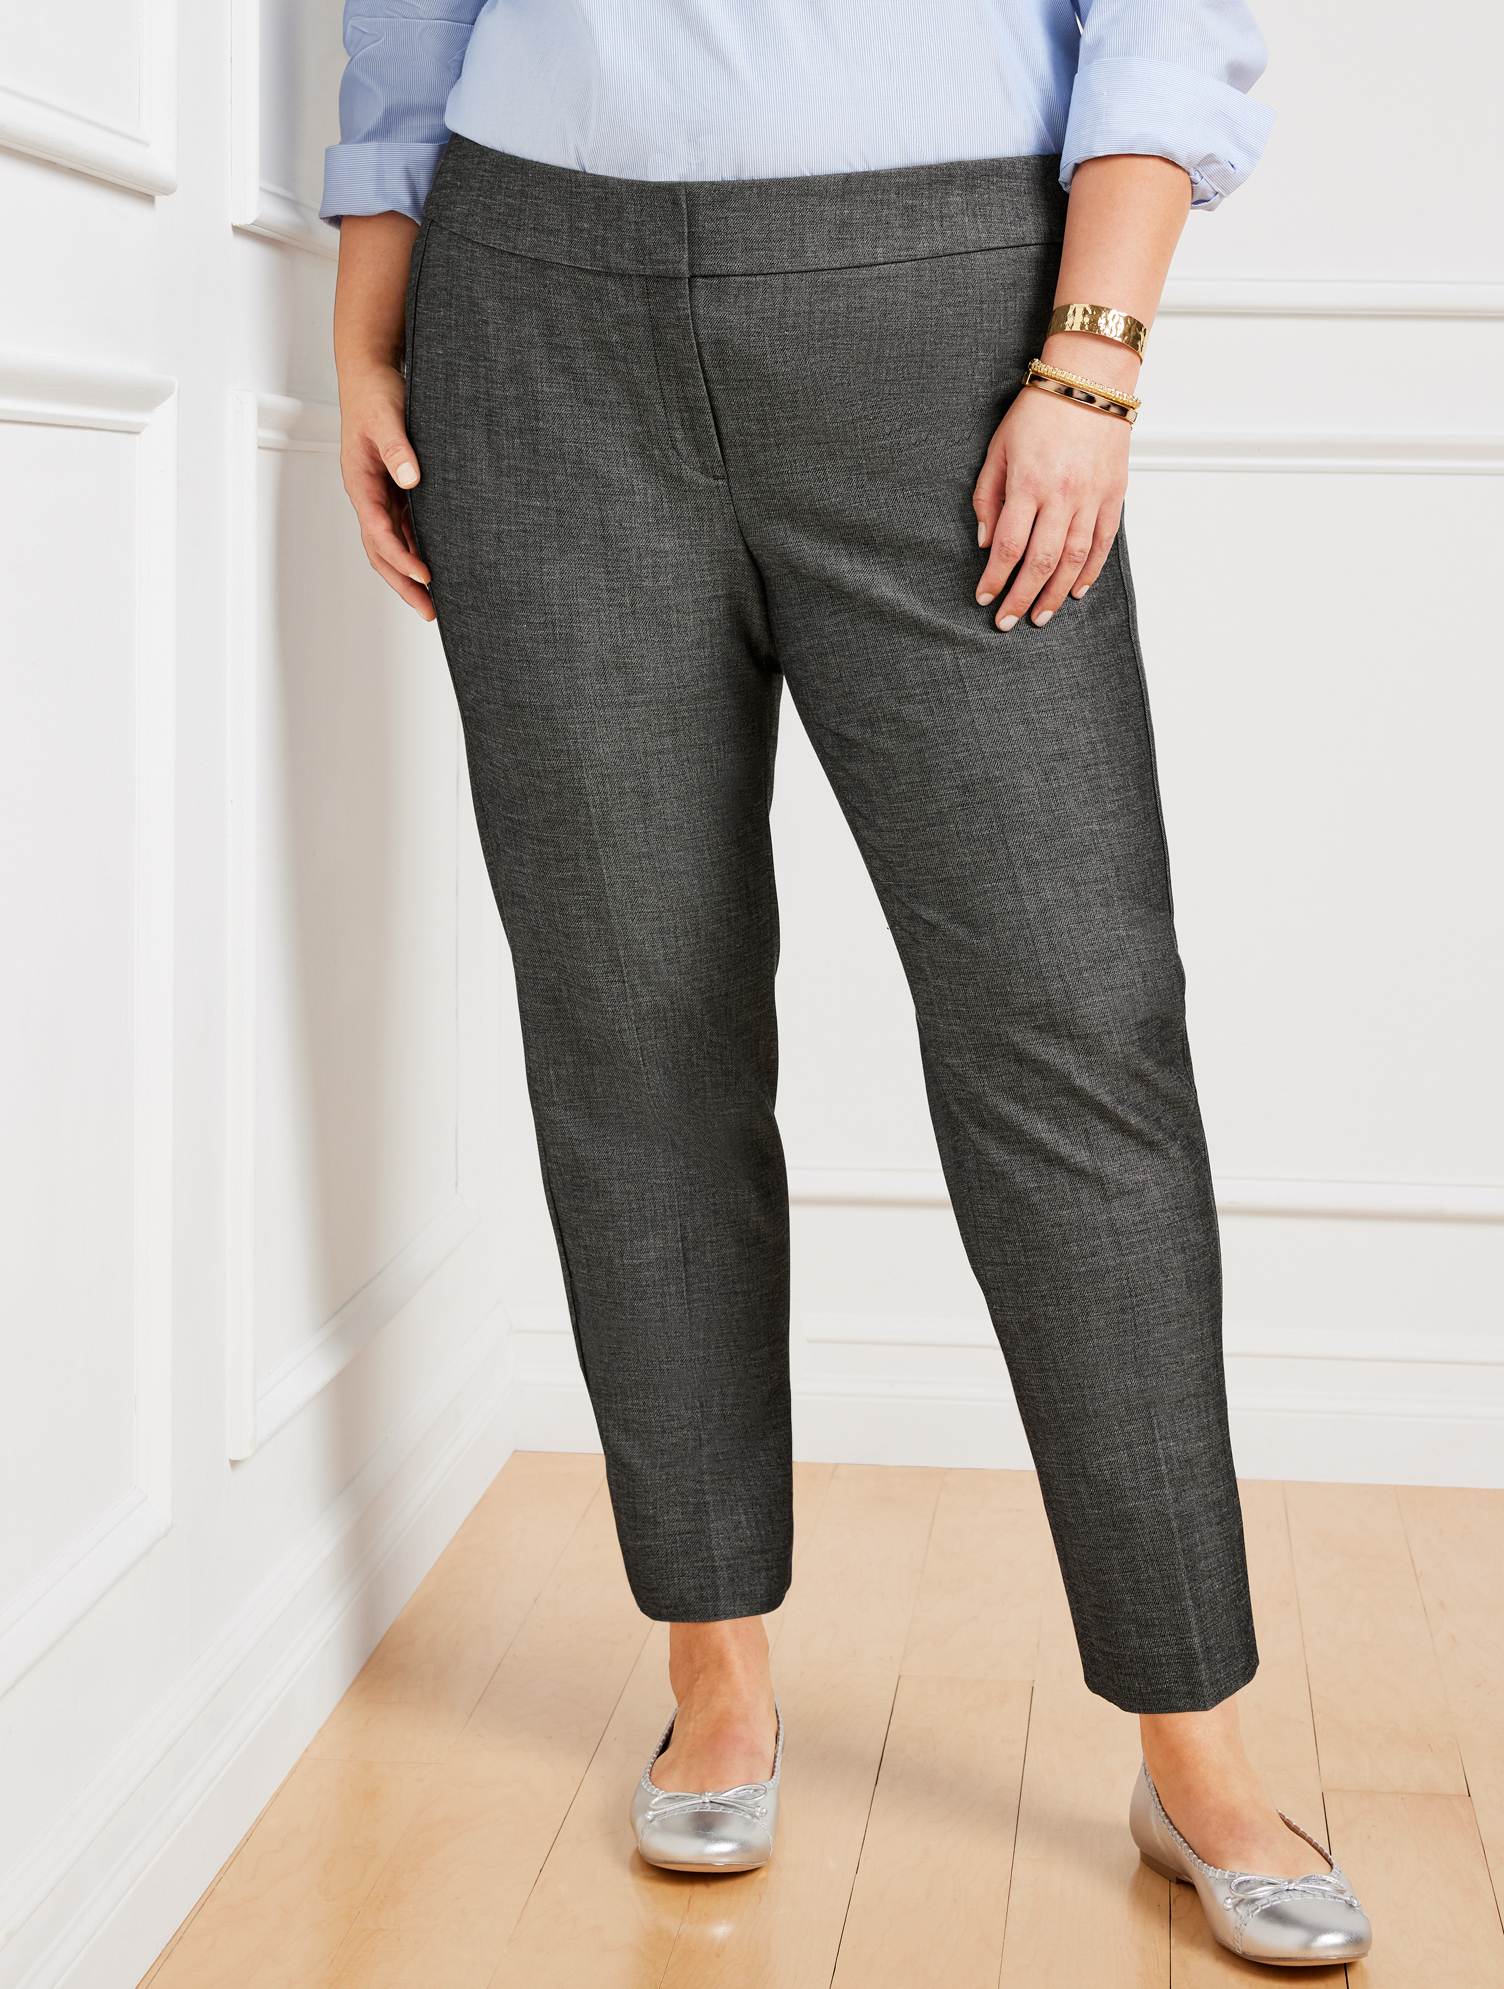 Talbots Plus Exclusive  Chatham Ankle Pants - Sharkskin - Black - 16